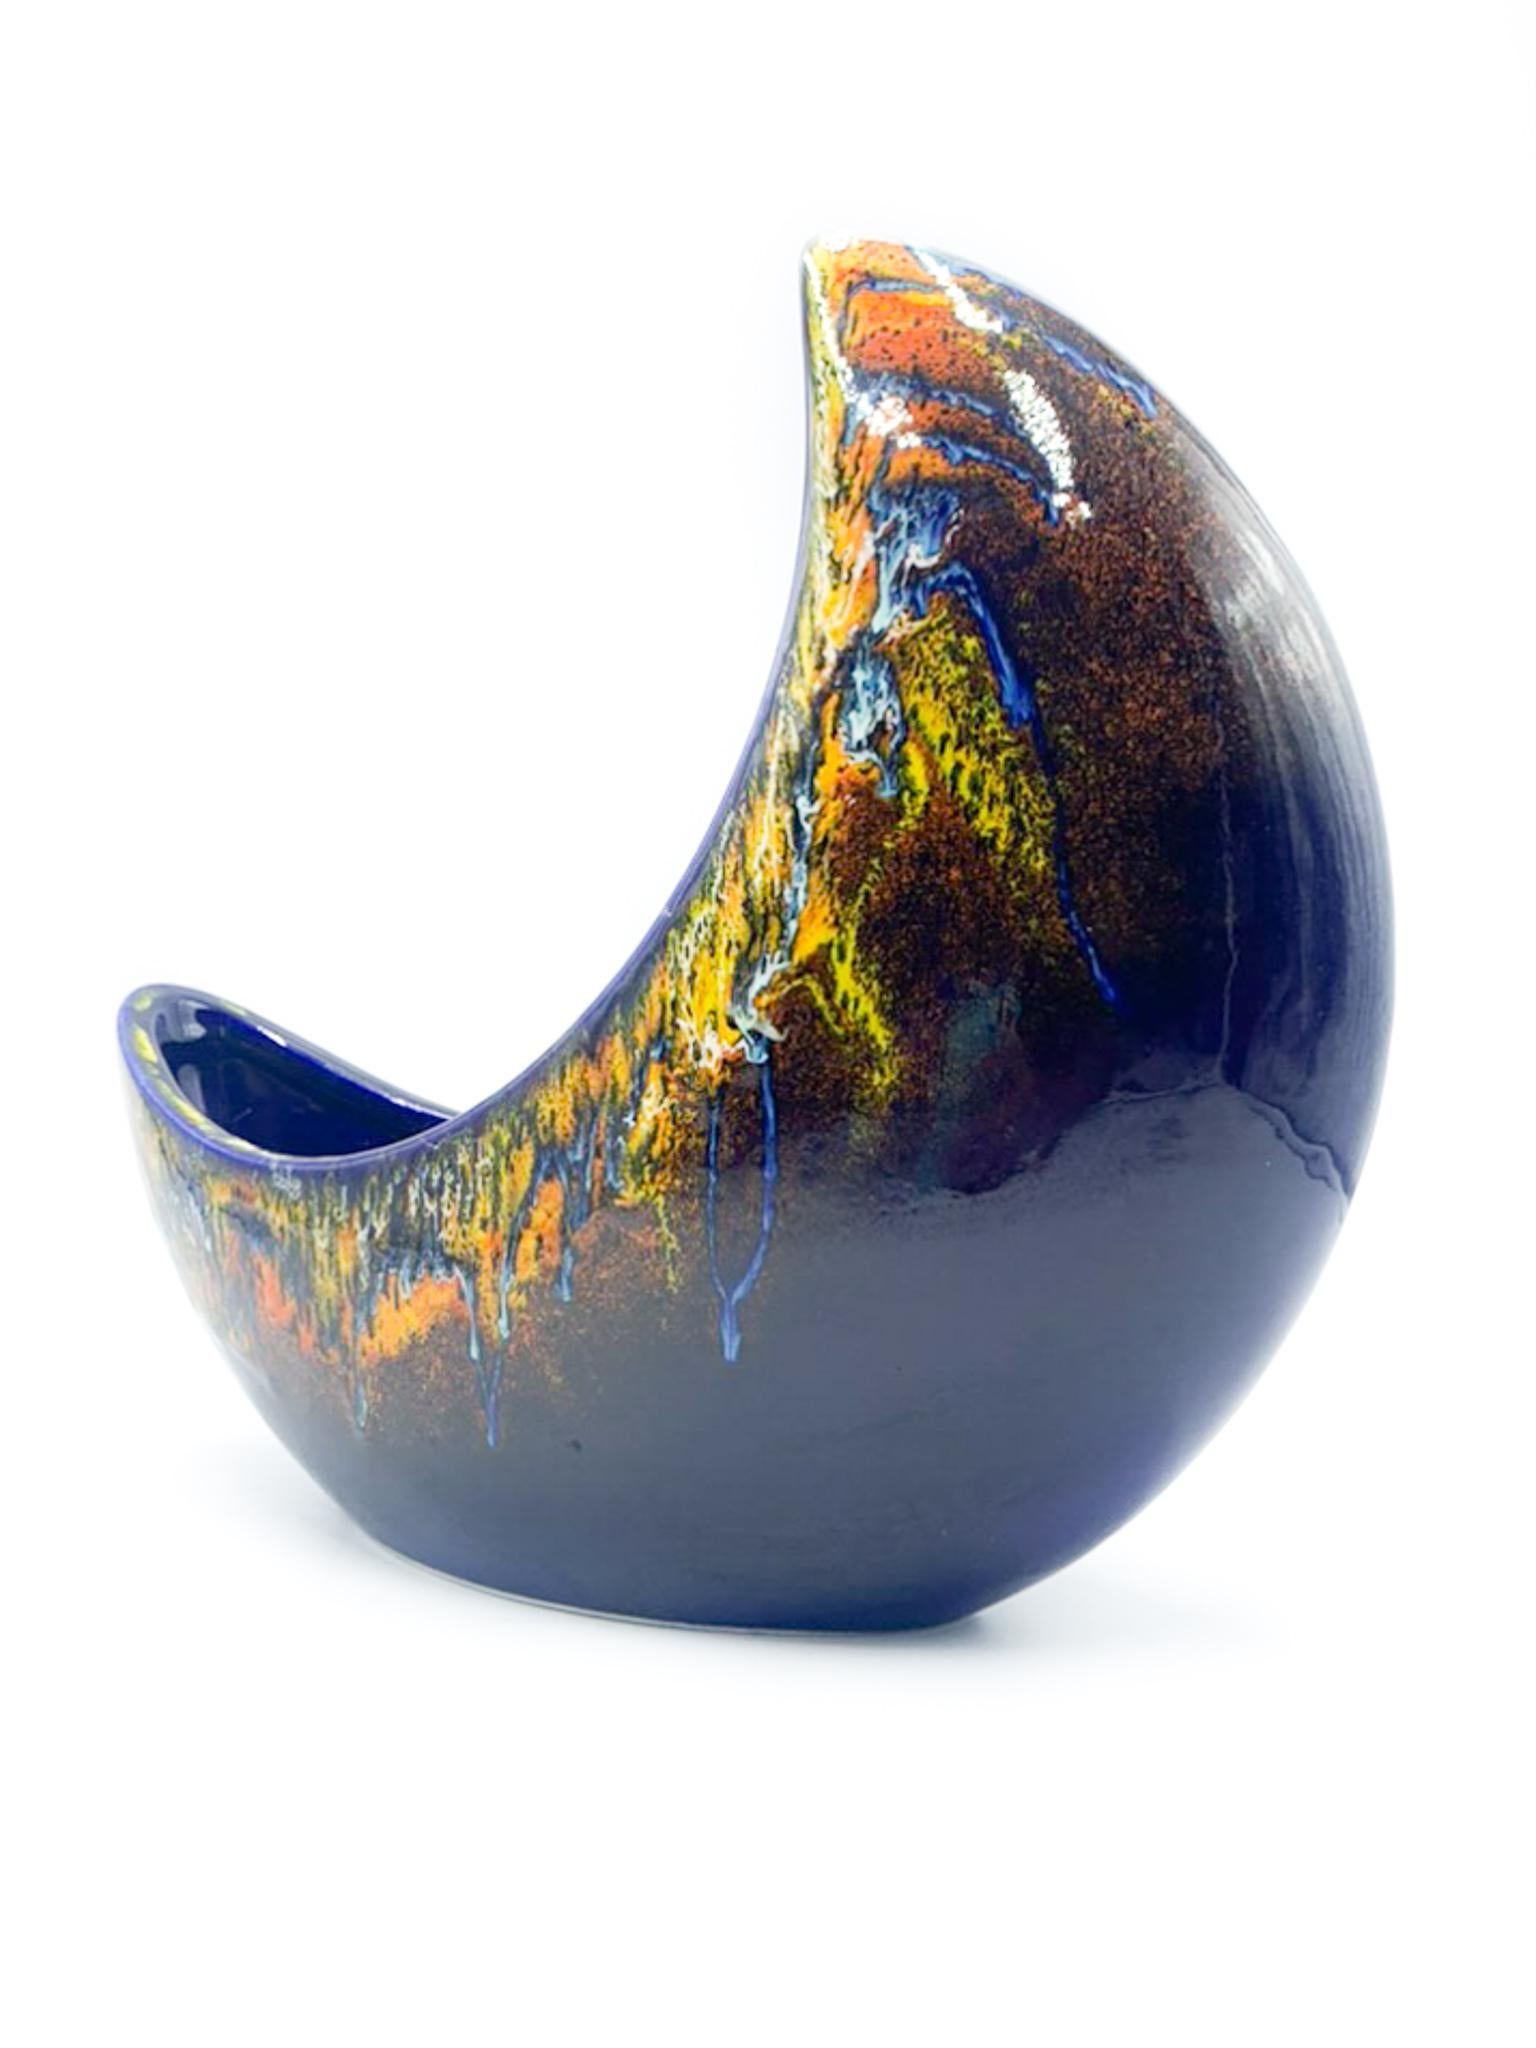 Ceramic Crescent-Shaped Hand Painted Vase by Roberto Rigon for Bertoncello, 1960s